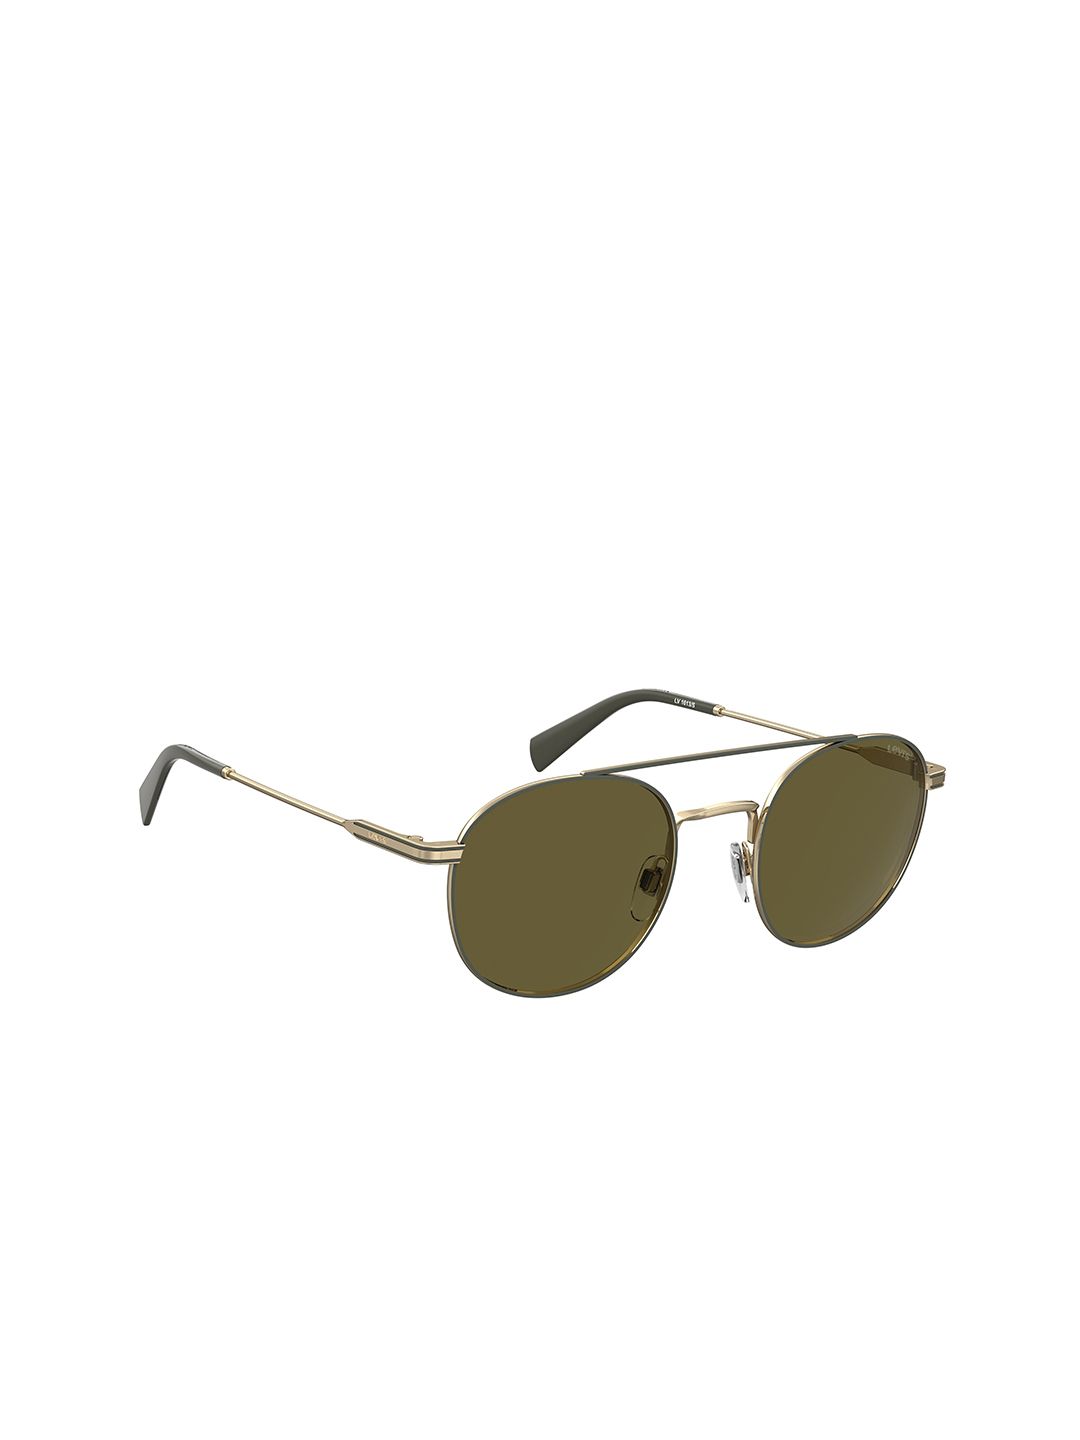 Levis Unisex Green Lens & Gold-Toned Round Sunglasses LV 1013/S J5G 54QT Price in India